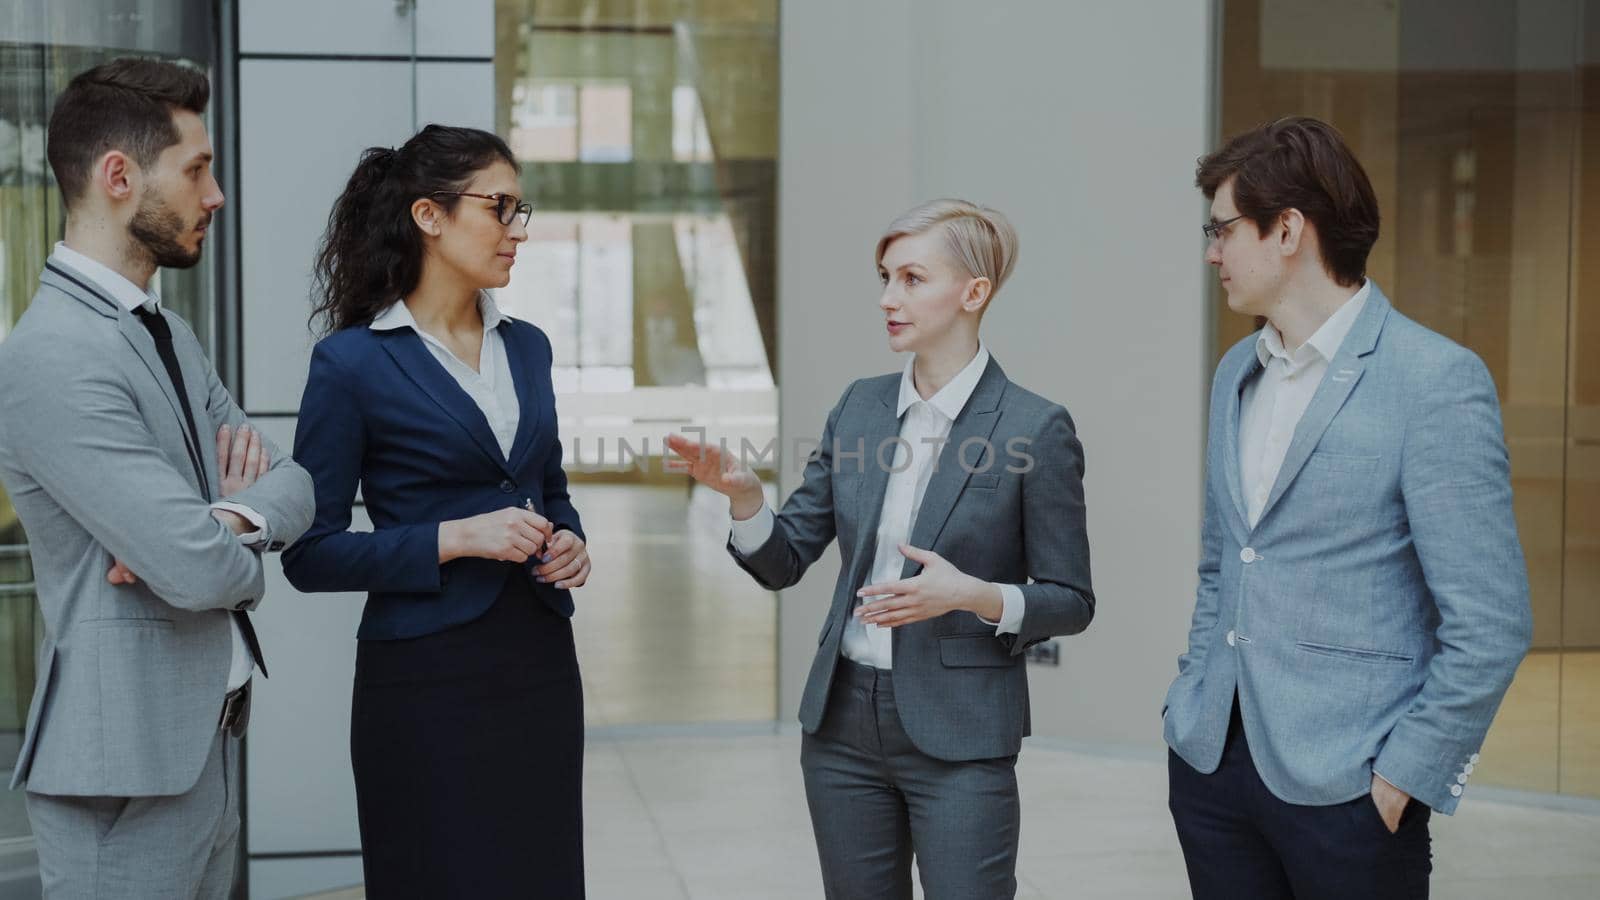 Businesswoman talking to her colleagues while standing in office lobby indoors. Group of business people discussing future deal